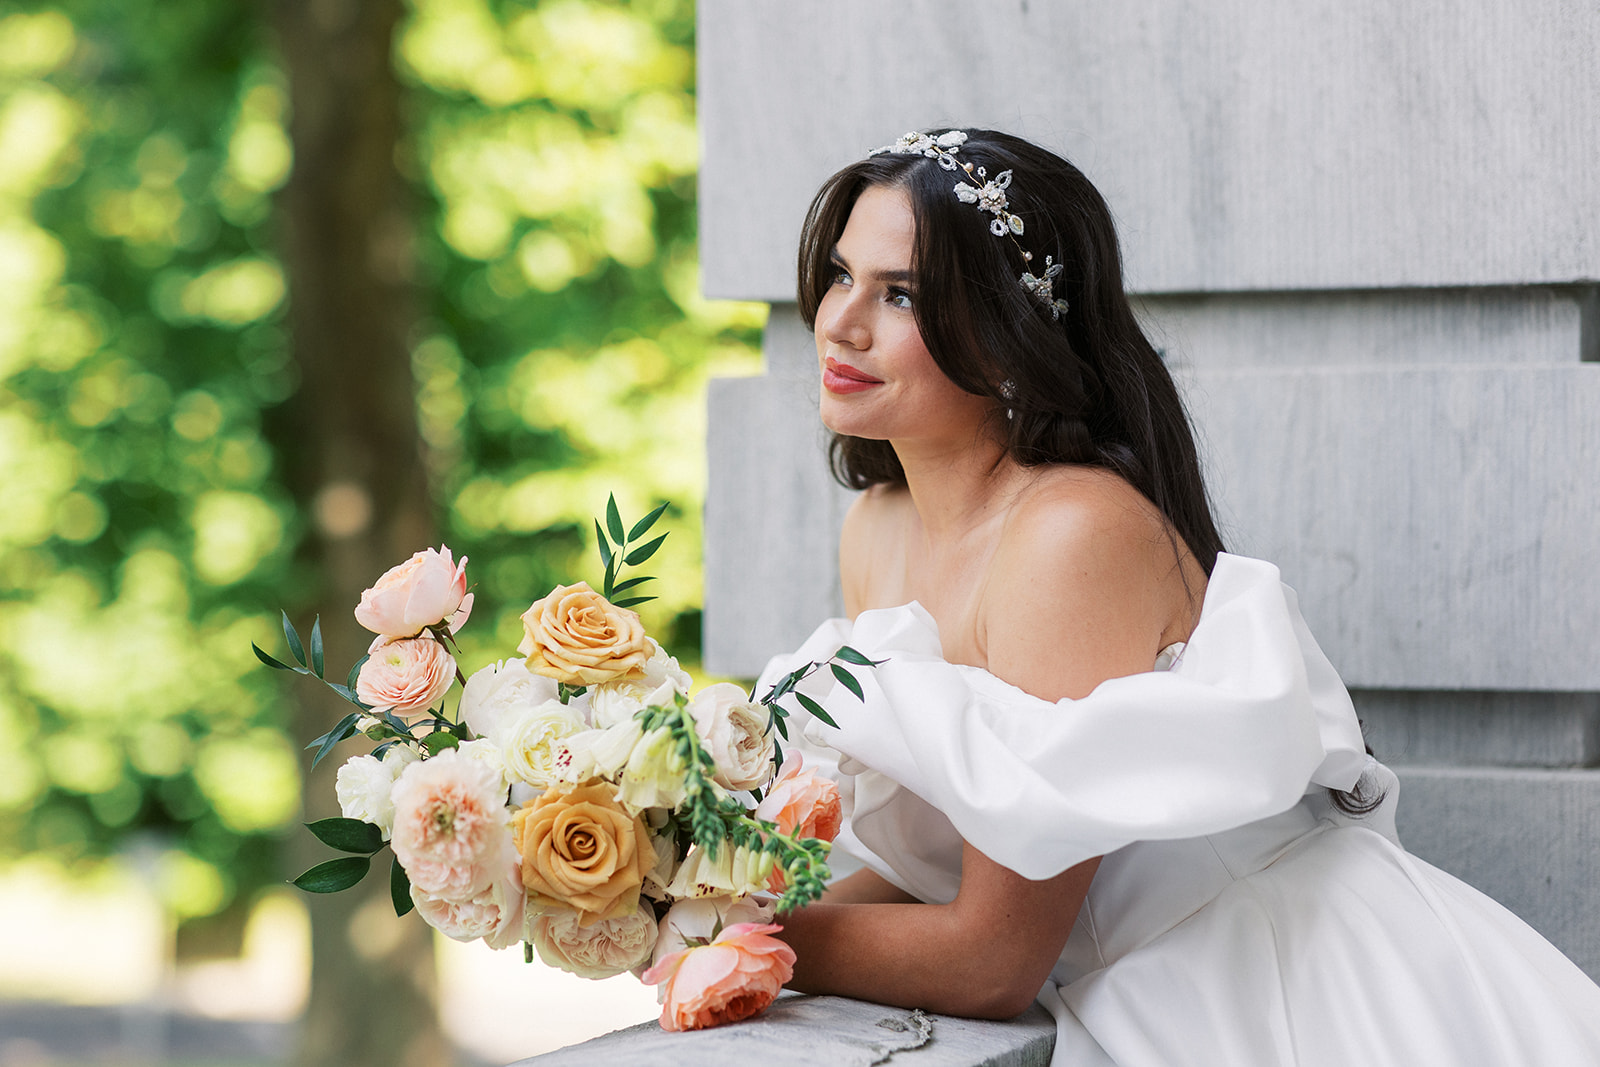 A bride leans on a railing looking out to a garden holding a large bouquet